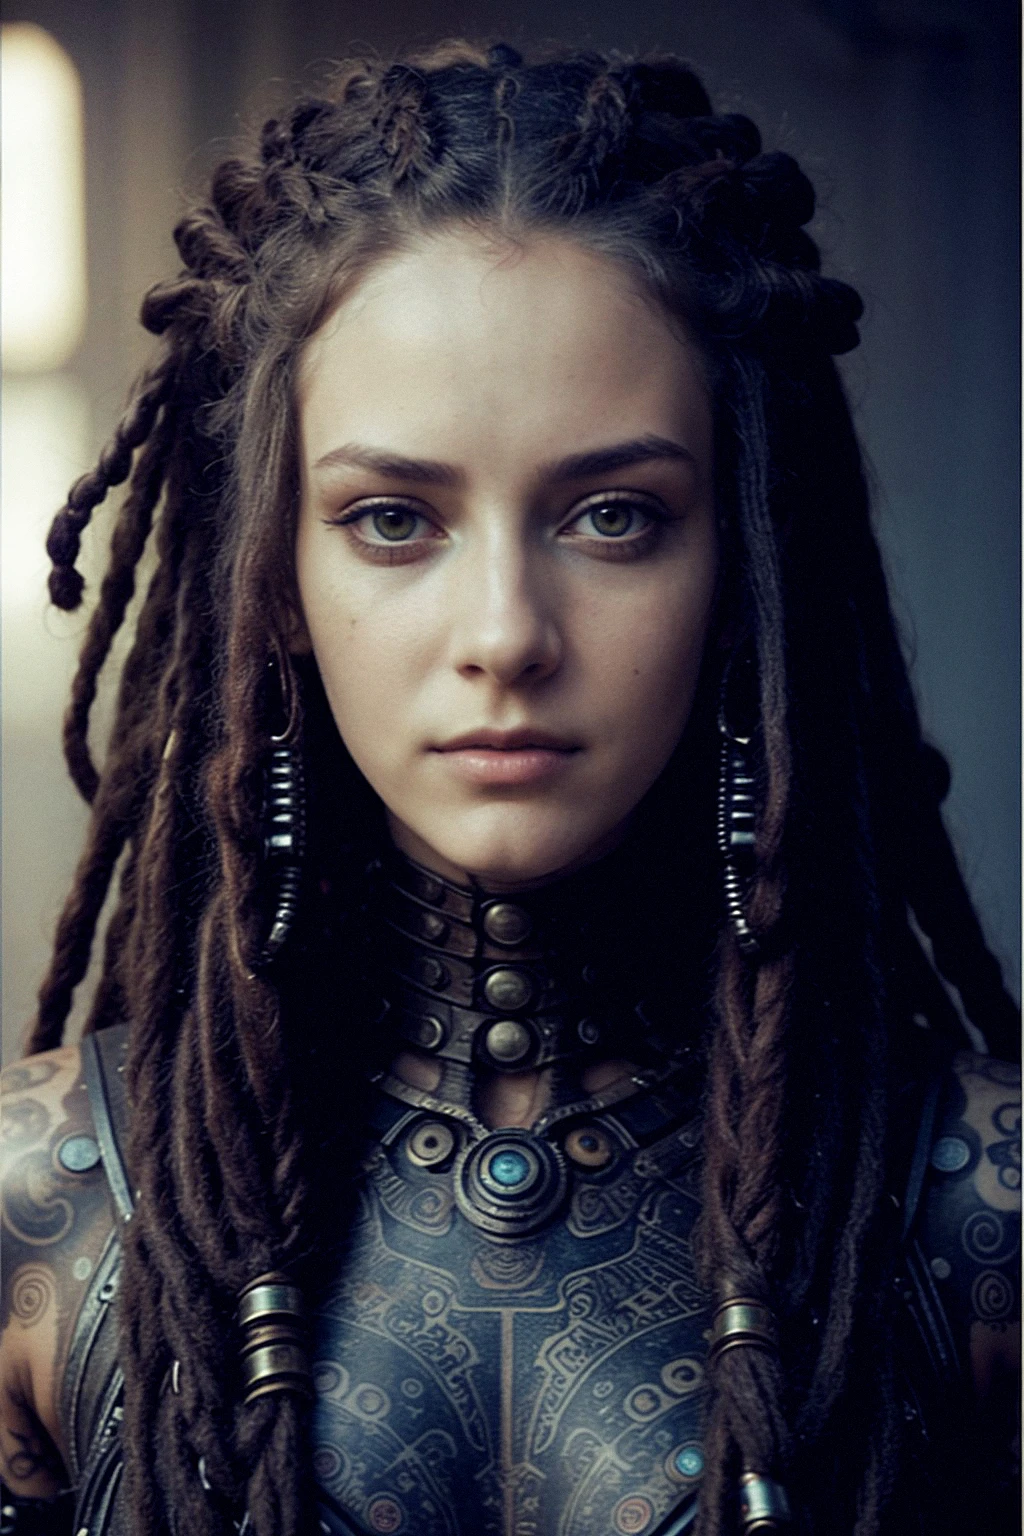 ASCIIa girl 18 years old, with dread locks and makeup looks into the camera with a creepy look on her face and eyes, Android Jones, biopunk, concept art, video art, matrix color grading, tattoos in her face, scify,  steampunk_costume,  steampunkai